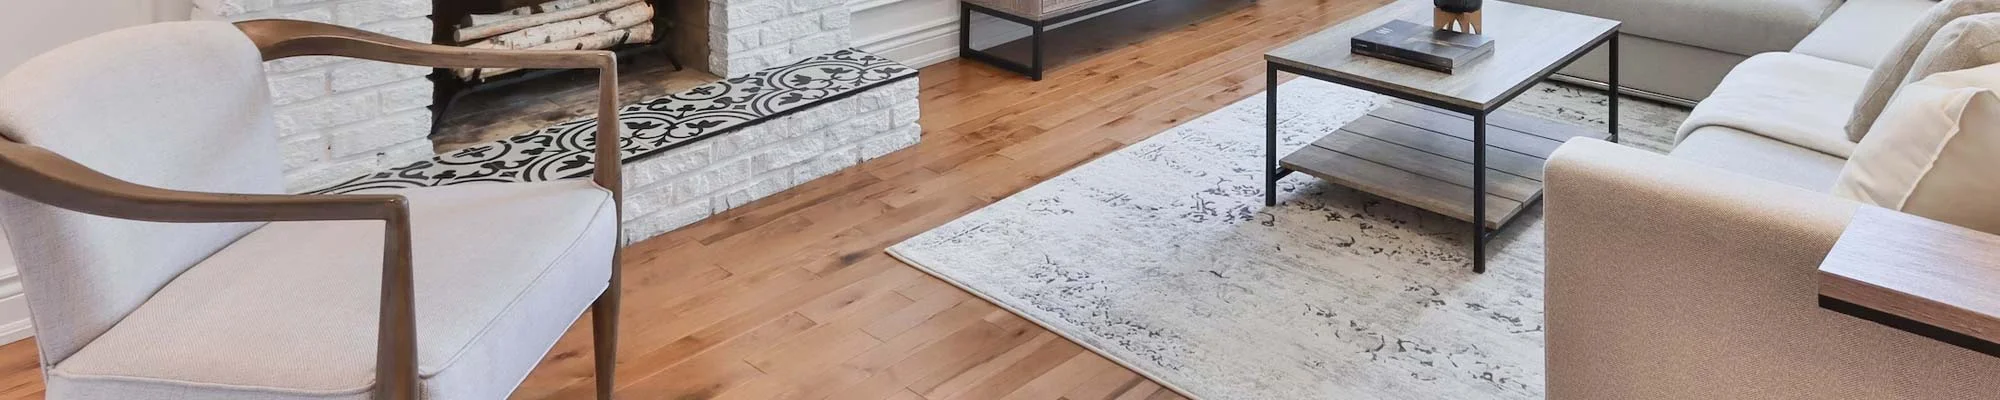 View Fox's Carpet Connection’s Flooring Product Catalog